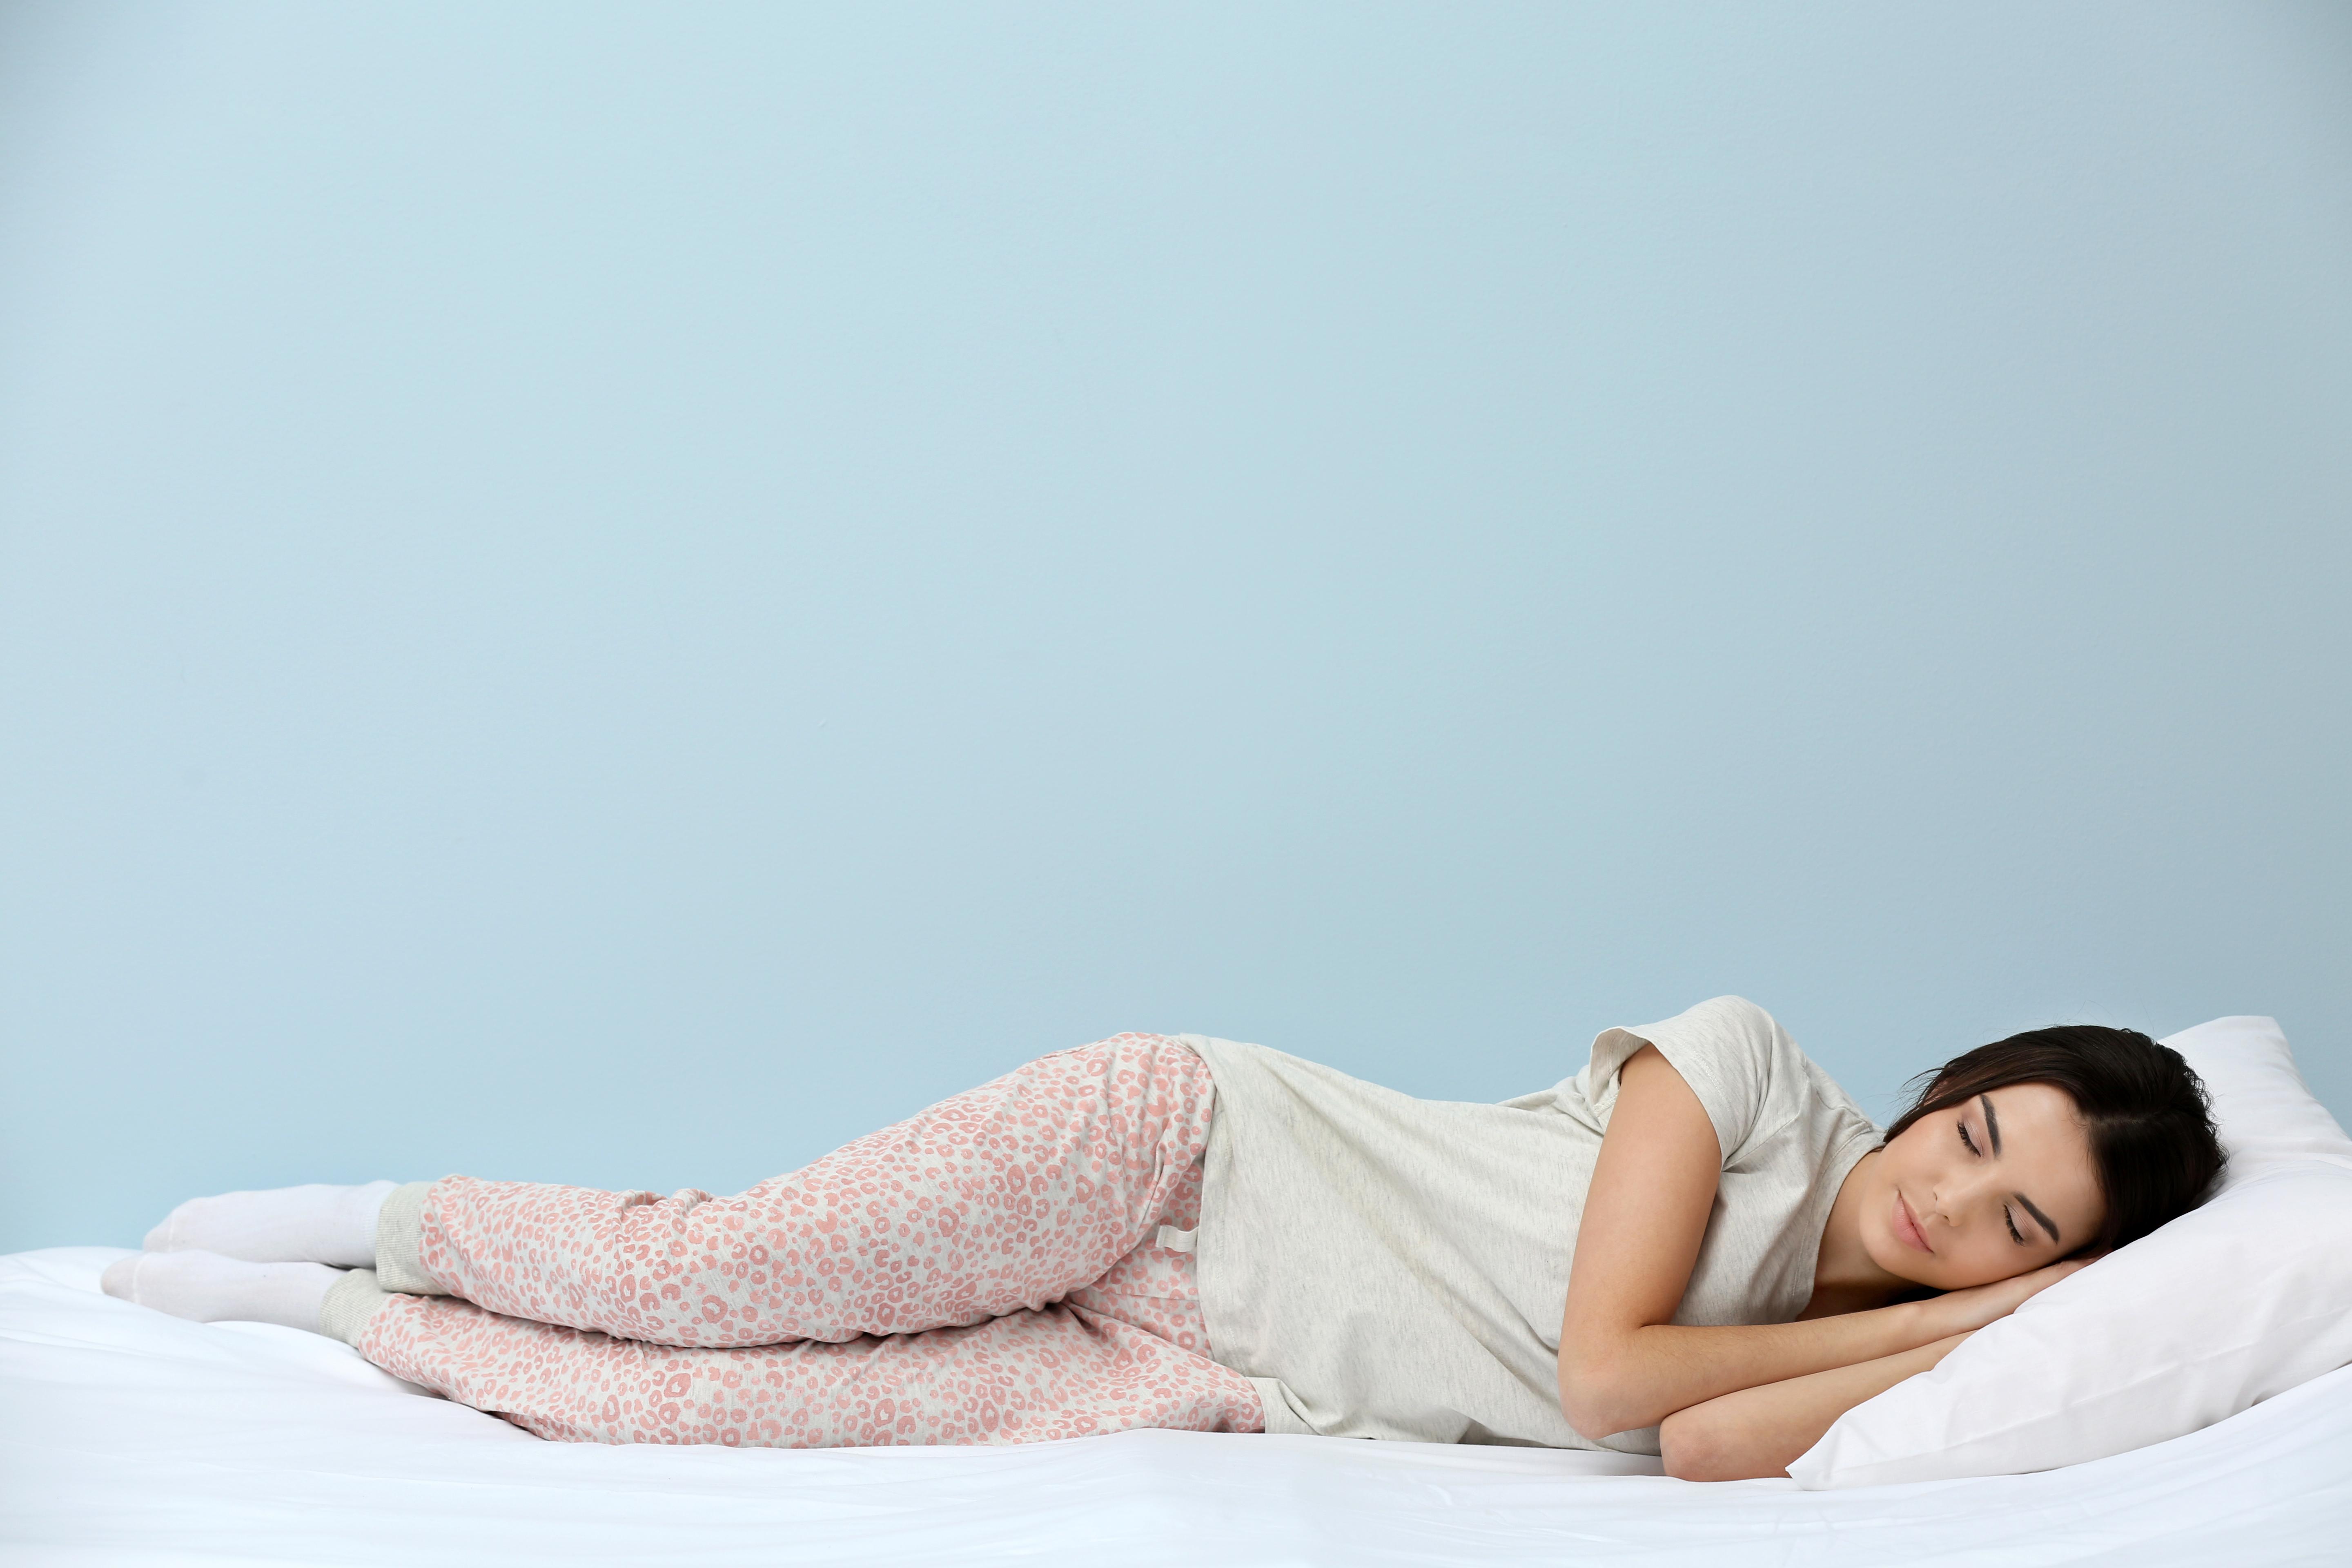 This course helps put students to sleep — in a good way